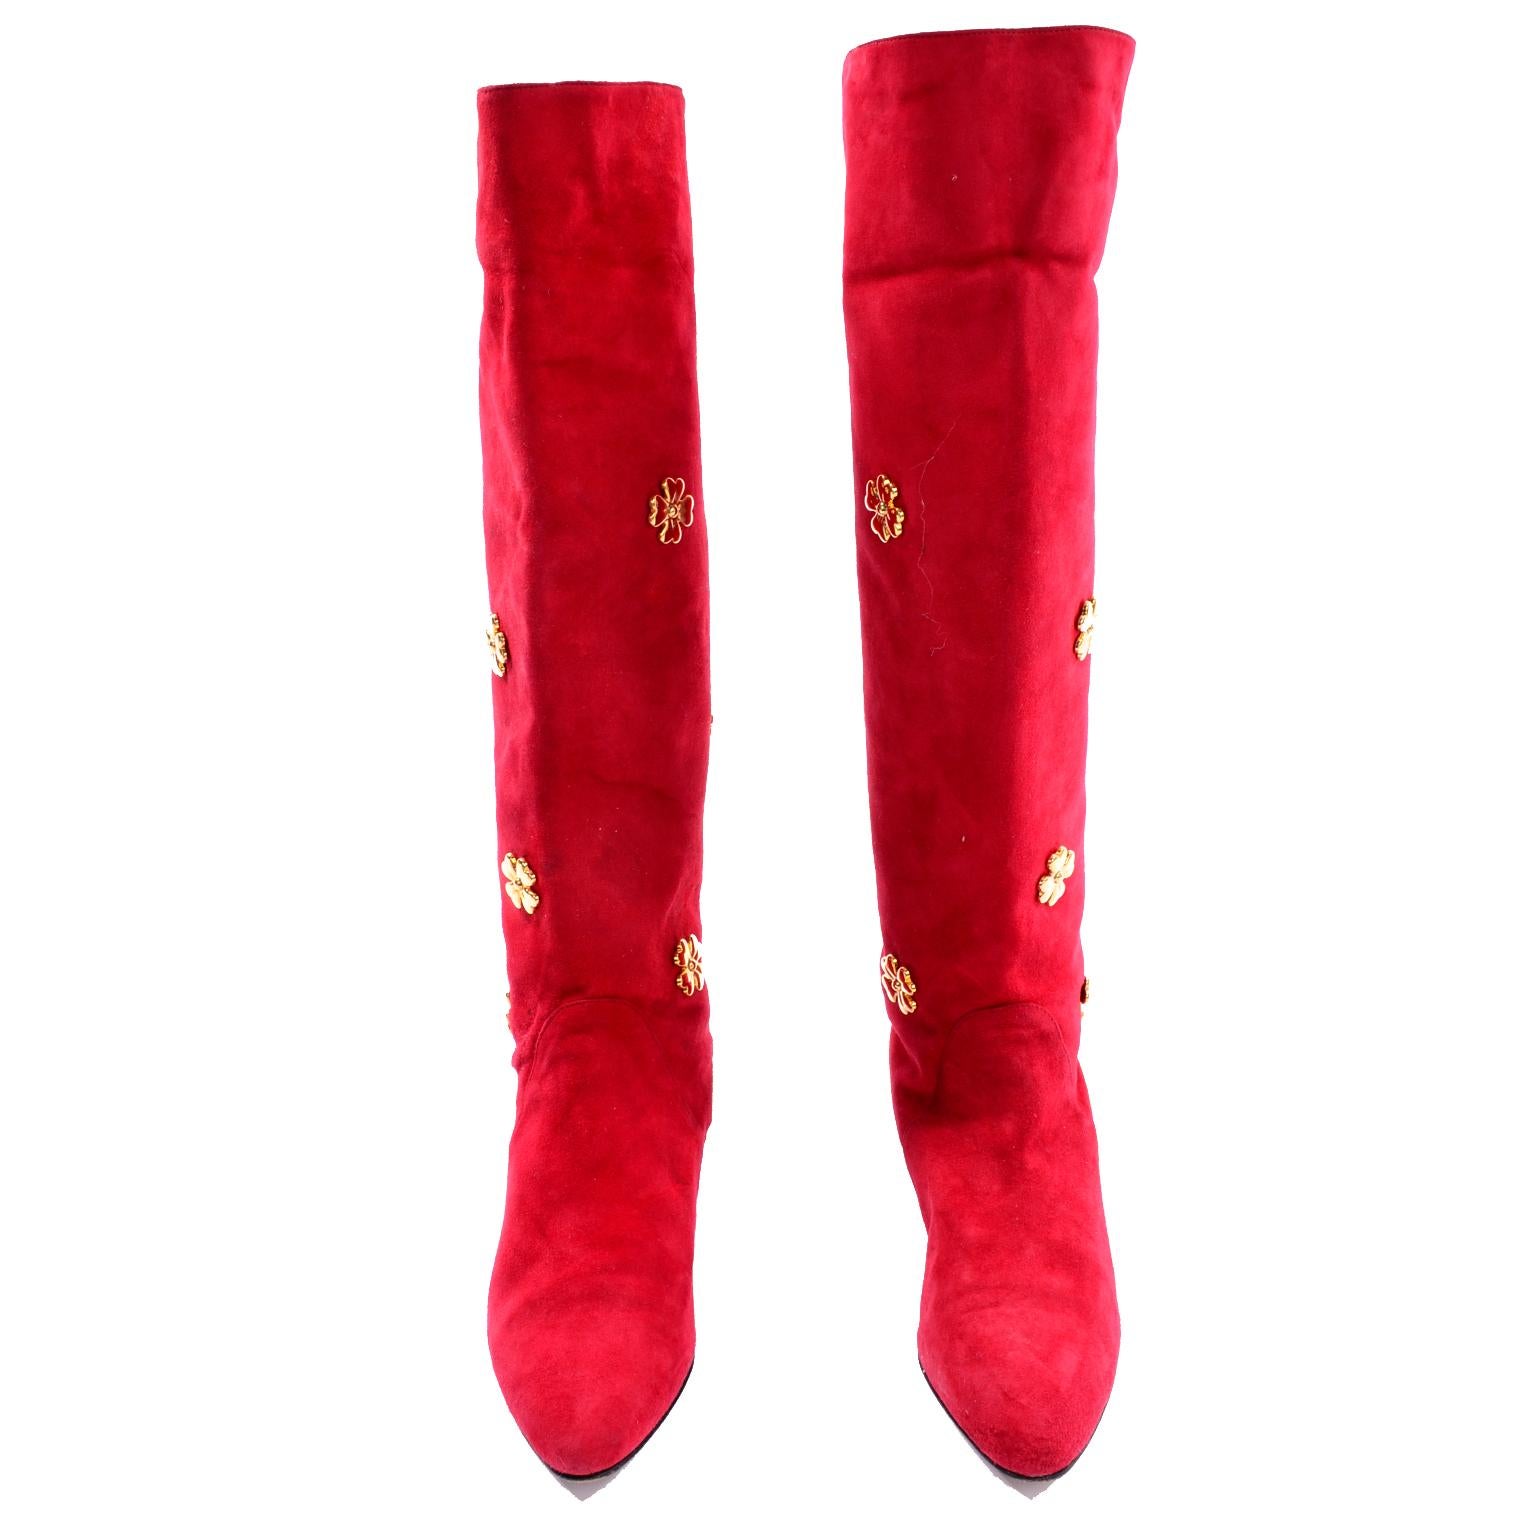 Vintage 1980s Escada Red Suede Boots With Gold Metal Clovers Size 37 2